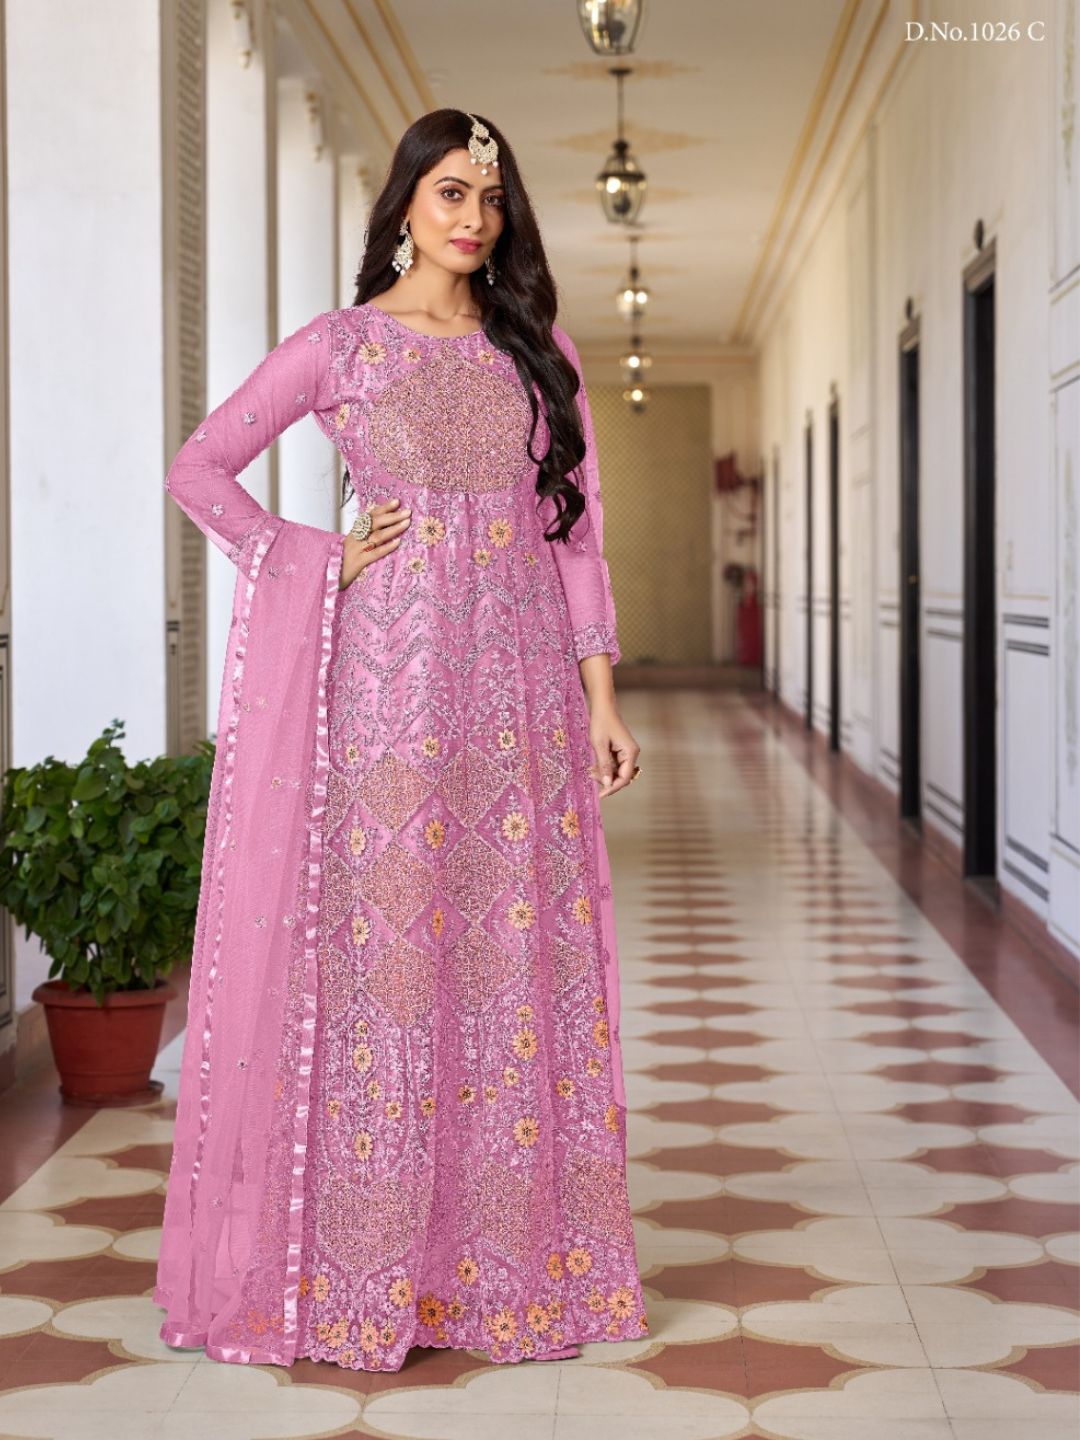 Net Embroidered Bollywood Salwar Kameez in Pink with Stone work-81975